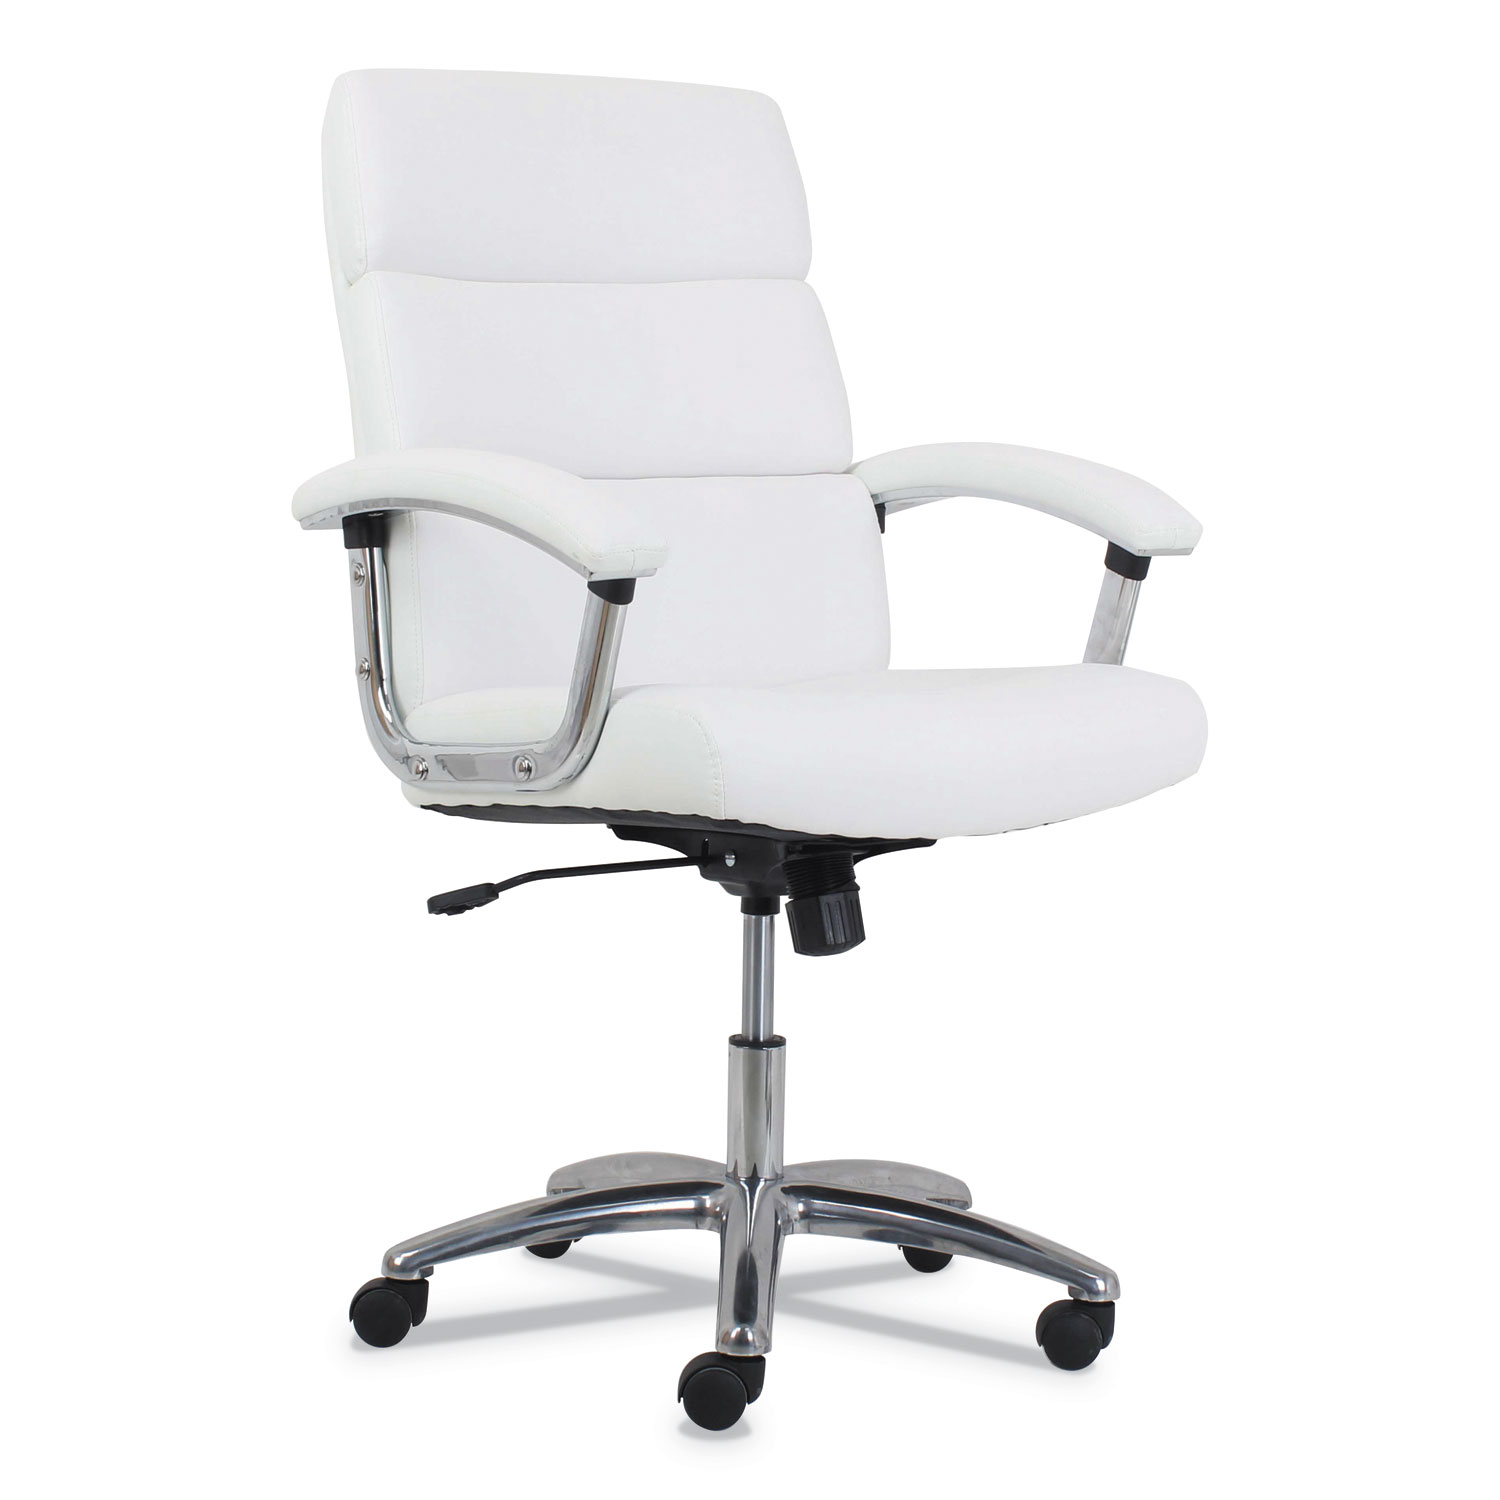  HON HVL103.SB06 Traction High-Back Executive Chair, Supports up to 250 lbs., White Seat/White Back, Polished Aluminum Base (HONVL103SB06) 